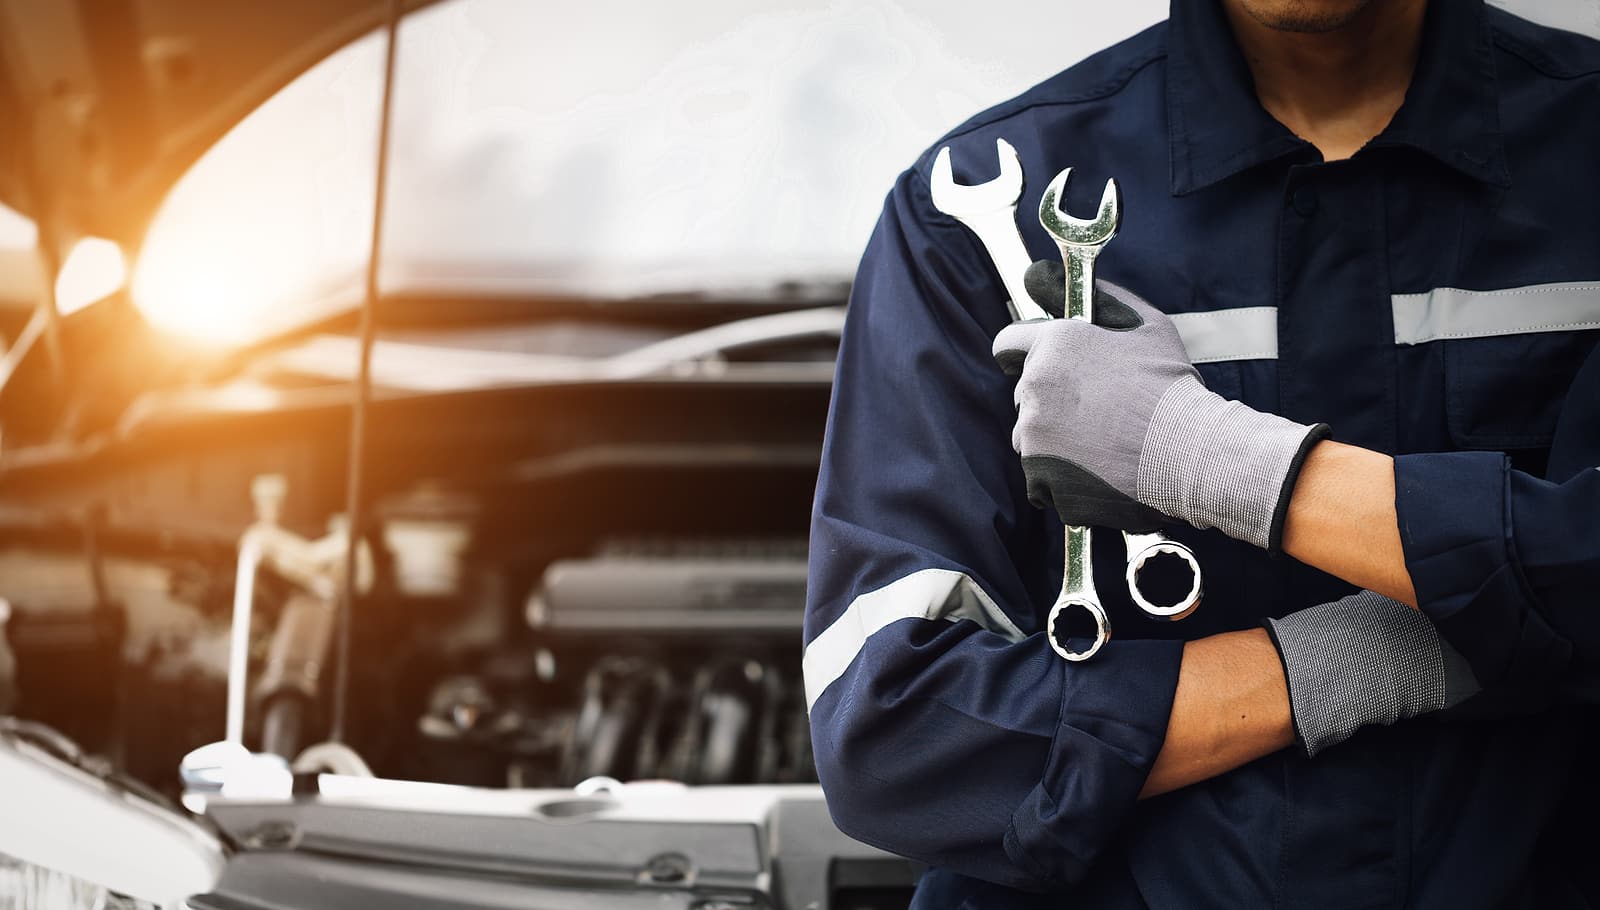 4 Tips for Talking With Your Car Mechanic